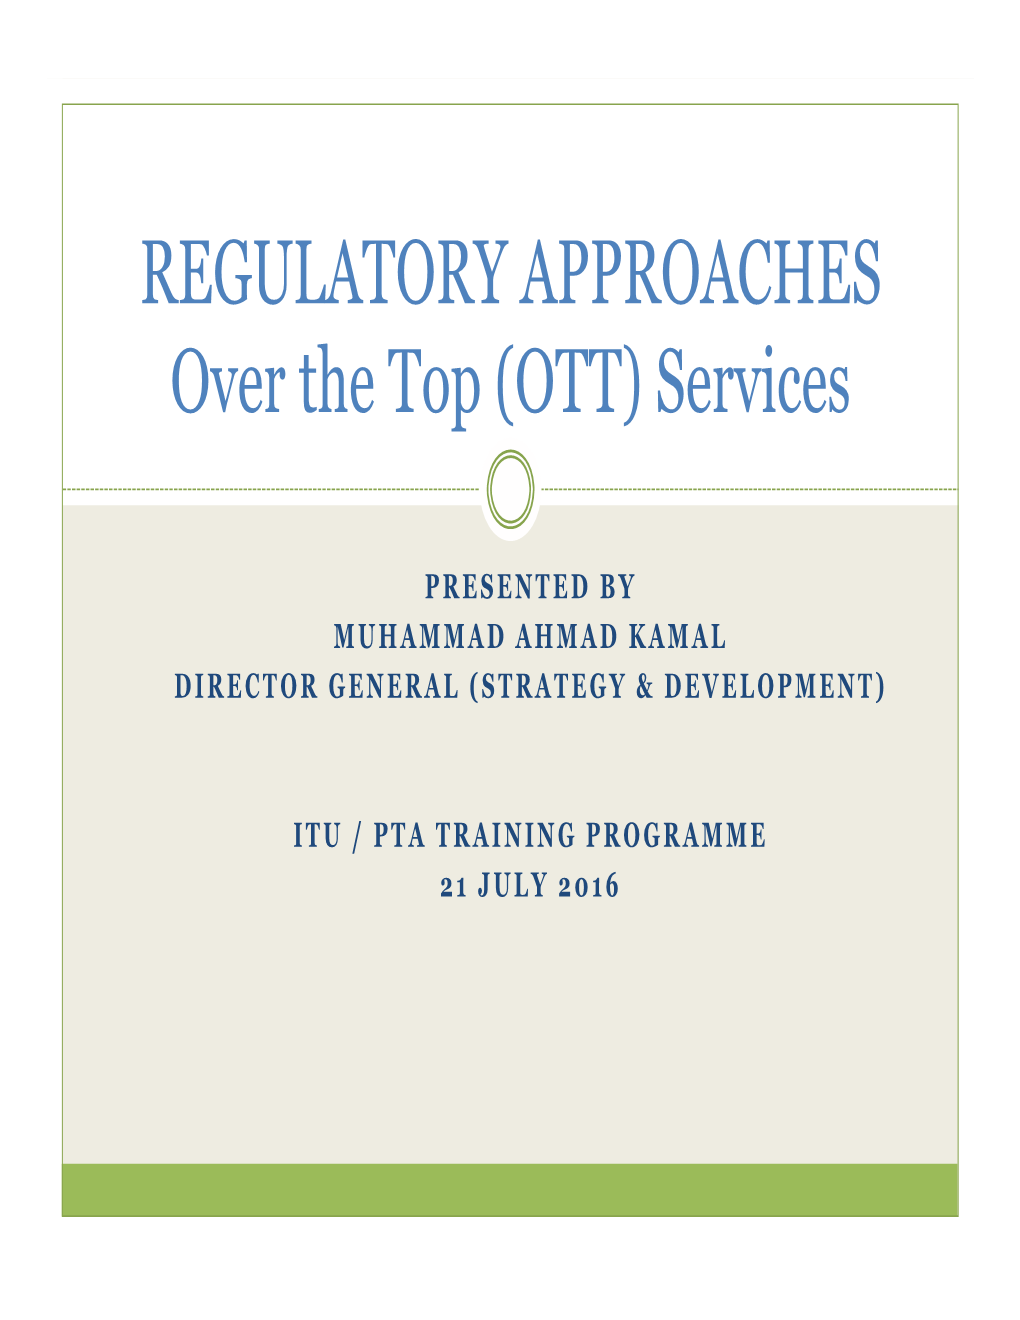 REGULATORY APPROACHES Over the Top (OTT) Services